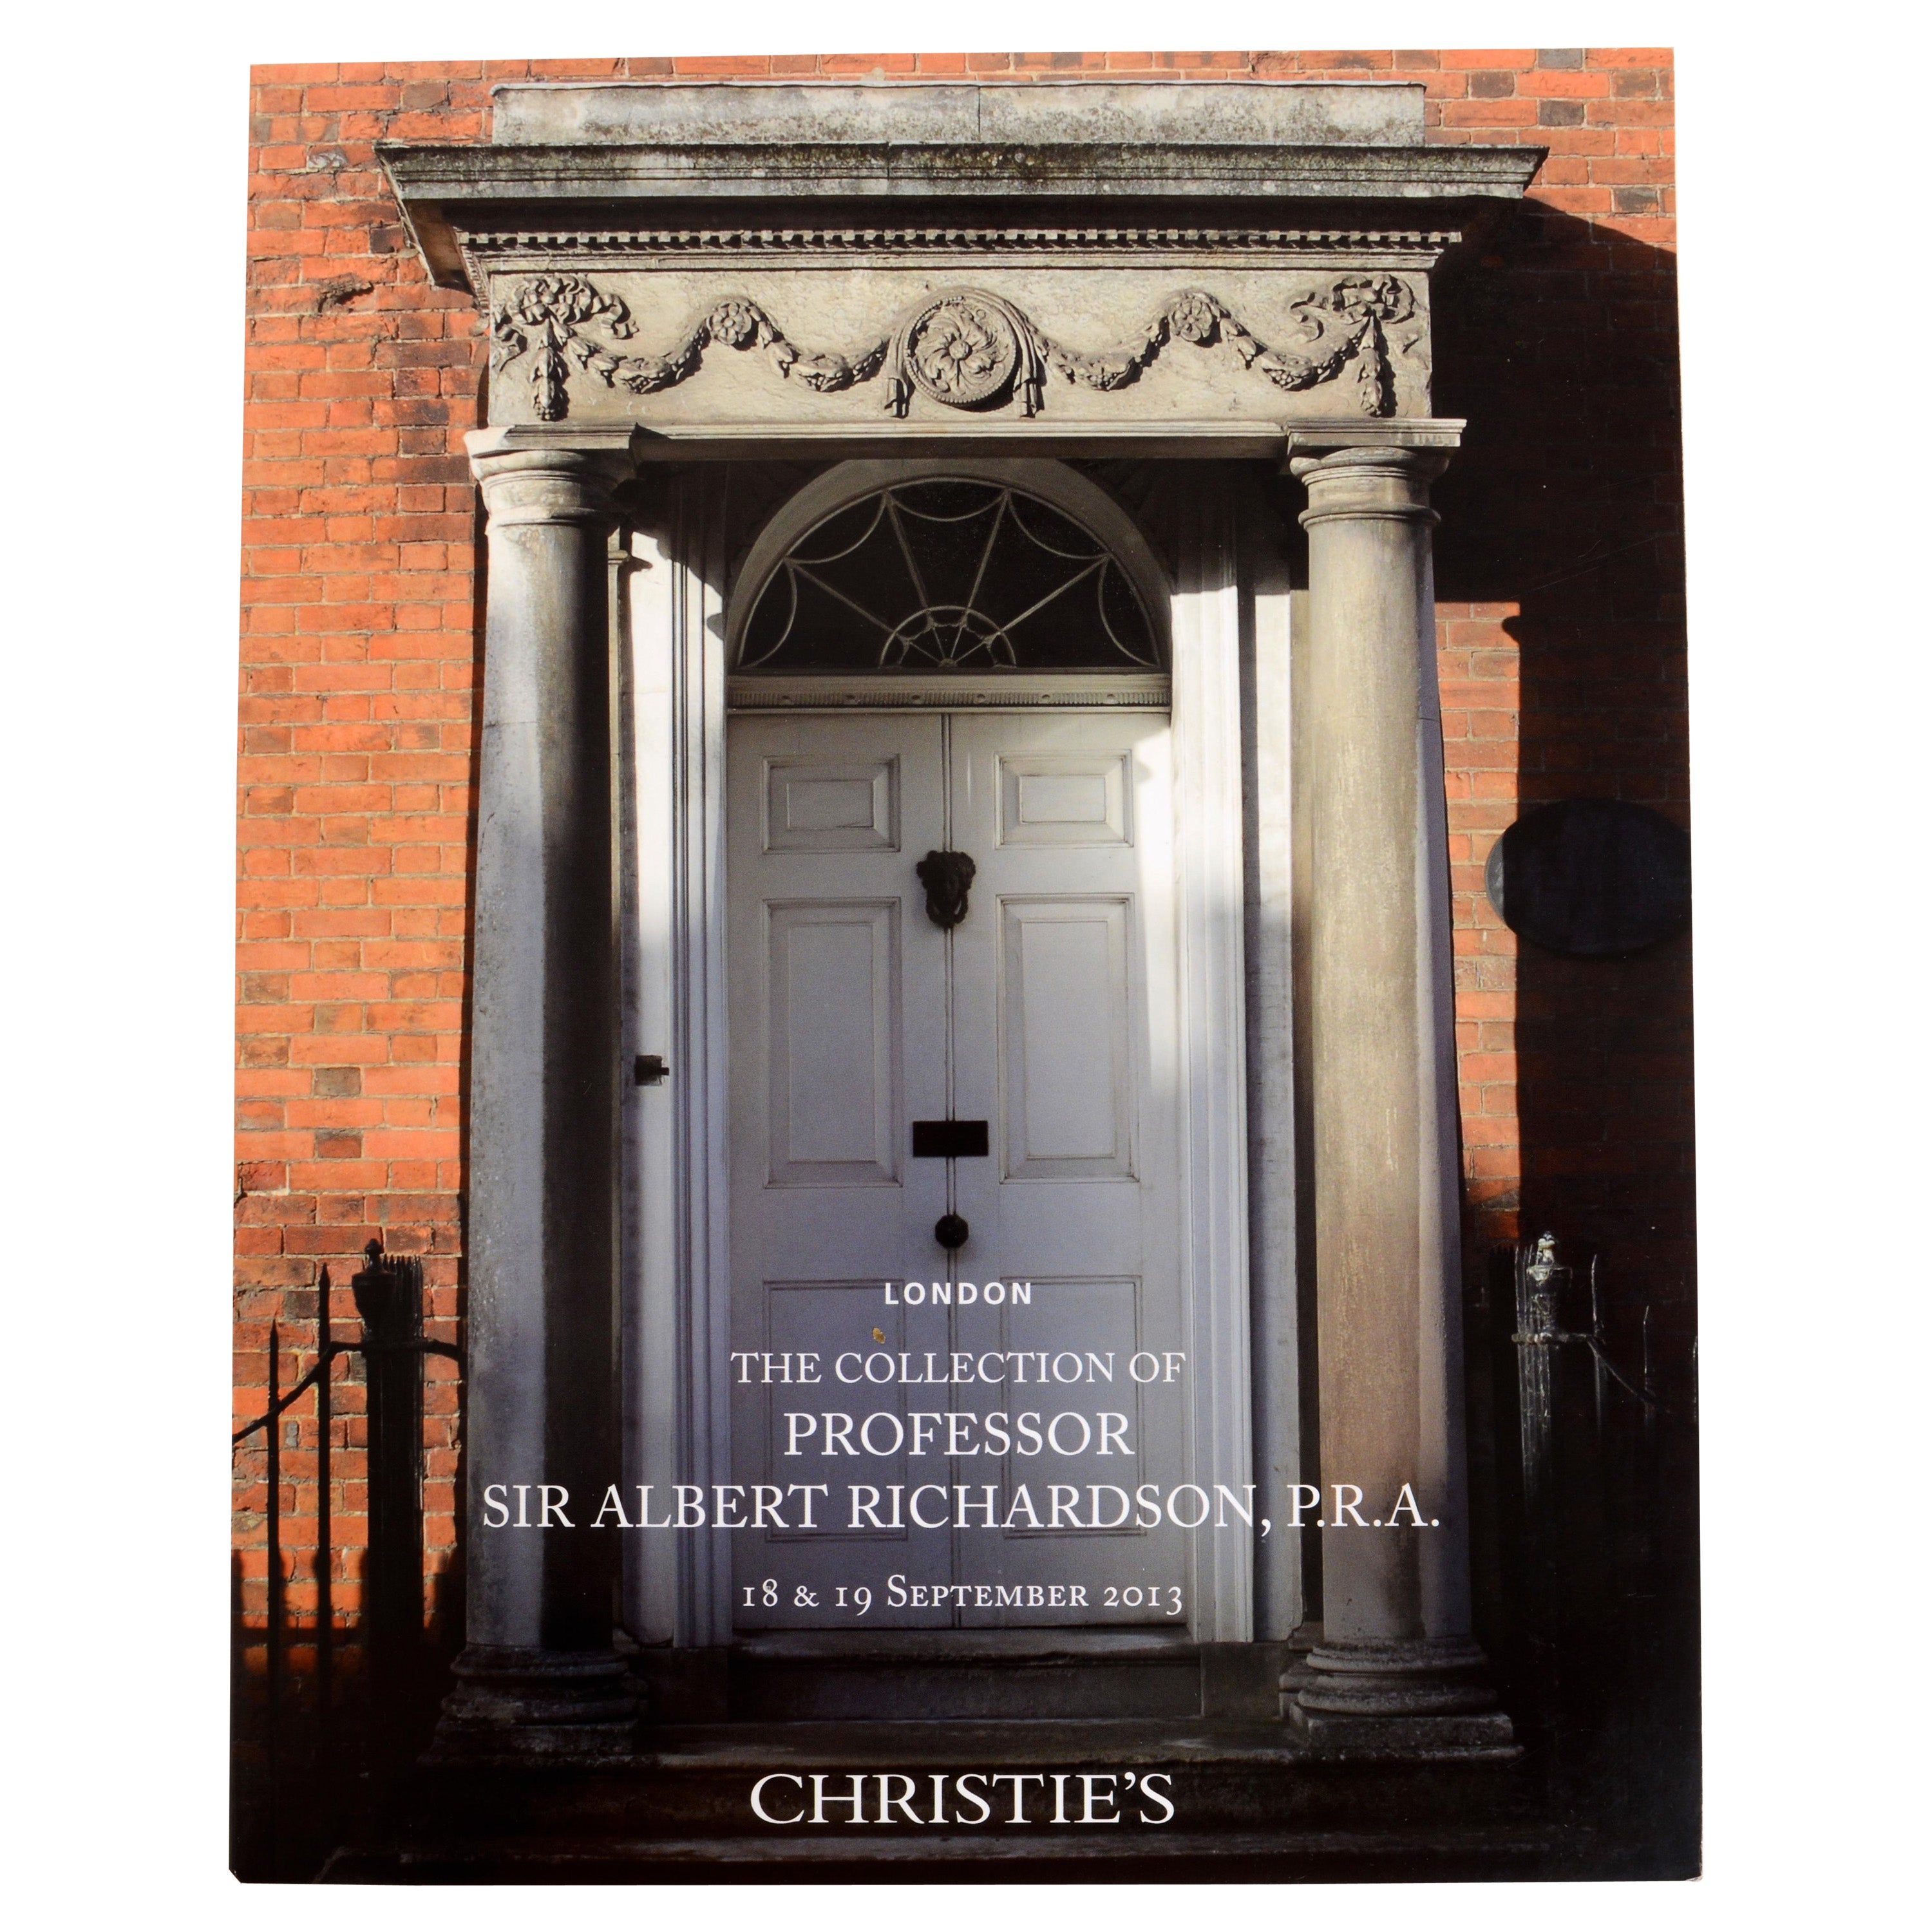 Christie's The Collection of Professor Sir Albert Richardson, P.R.A. London For Sale